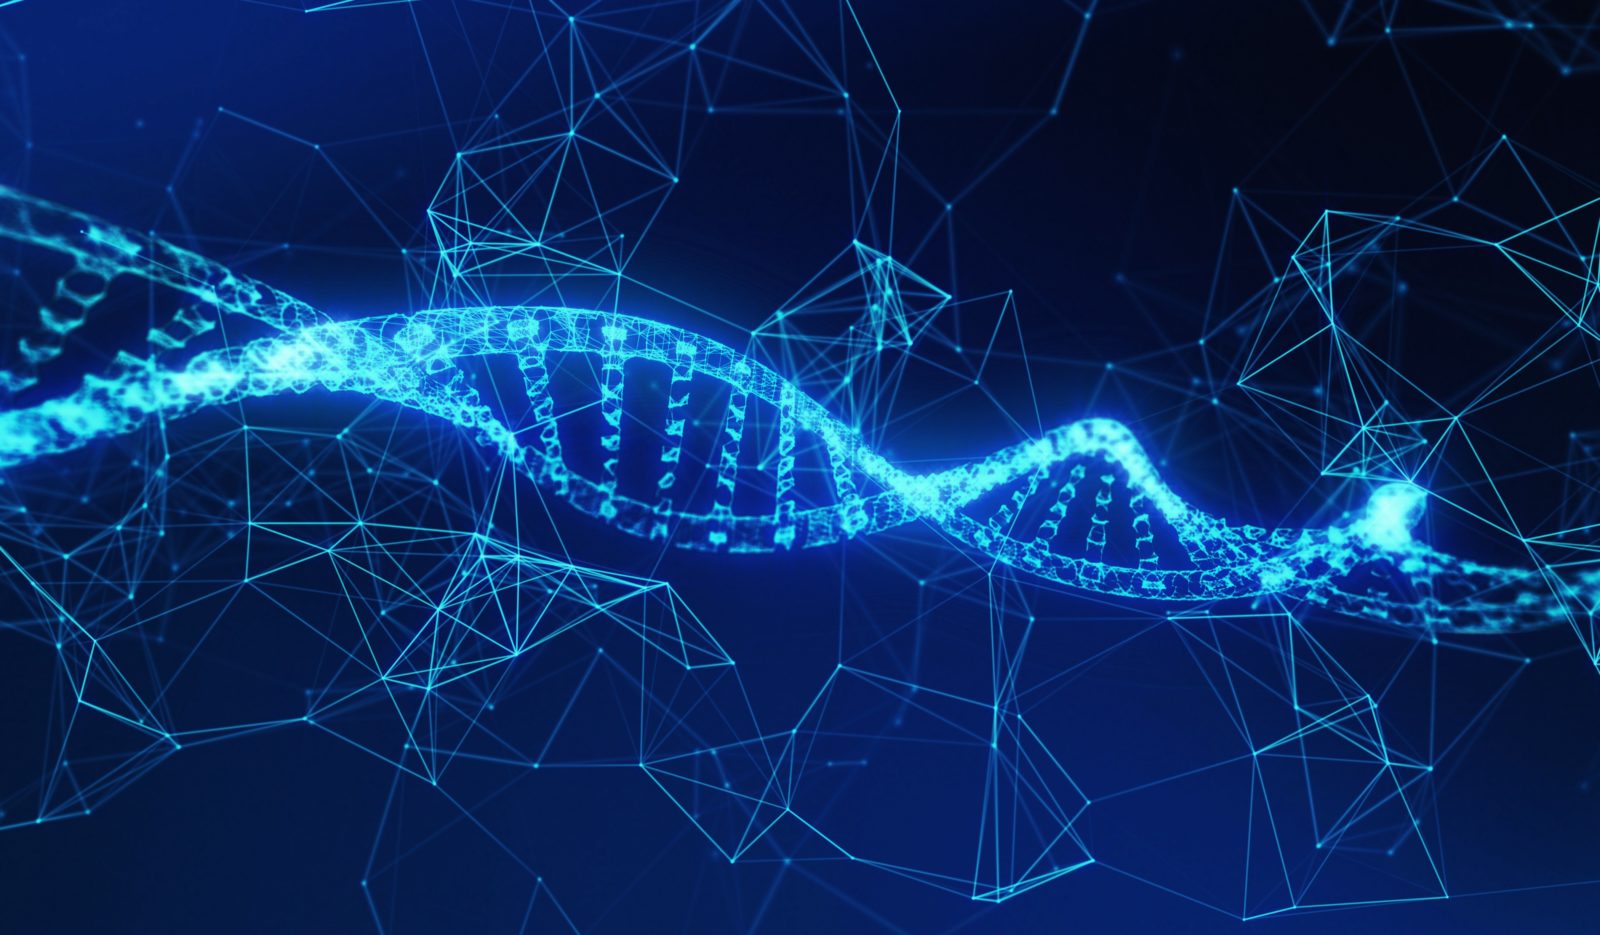 DNA, helix model medicine and network connection lines for technology concept on blue background, 3d illustration